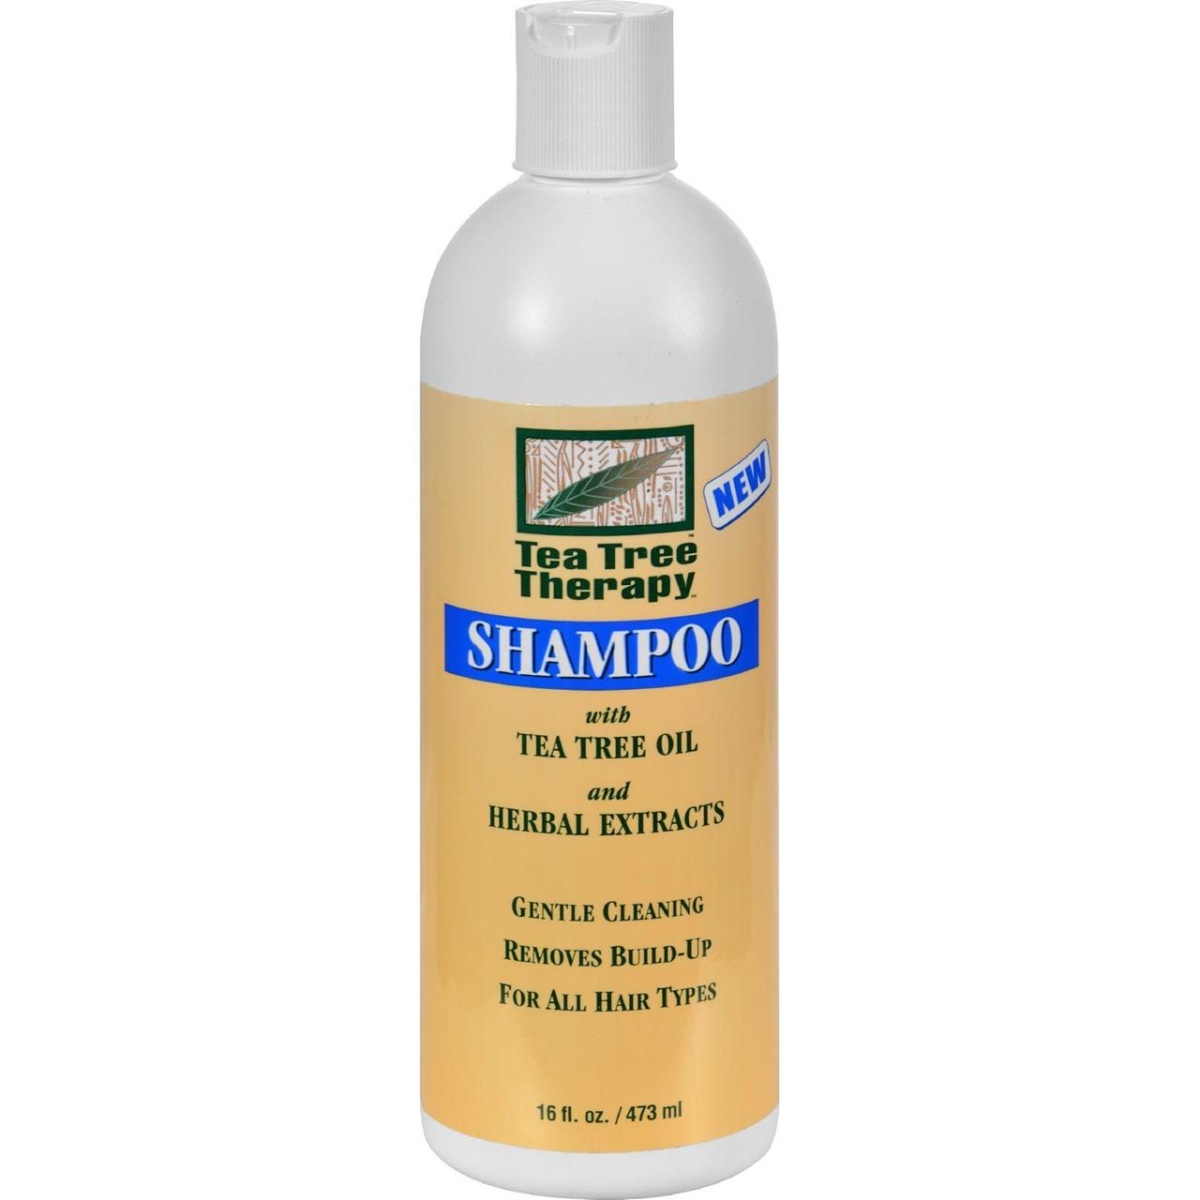 Hg0587741 16 Fl Oz Shampoo With Tea Tree Oil & Herbal Extracts Gentle Cleaning